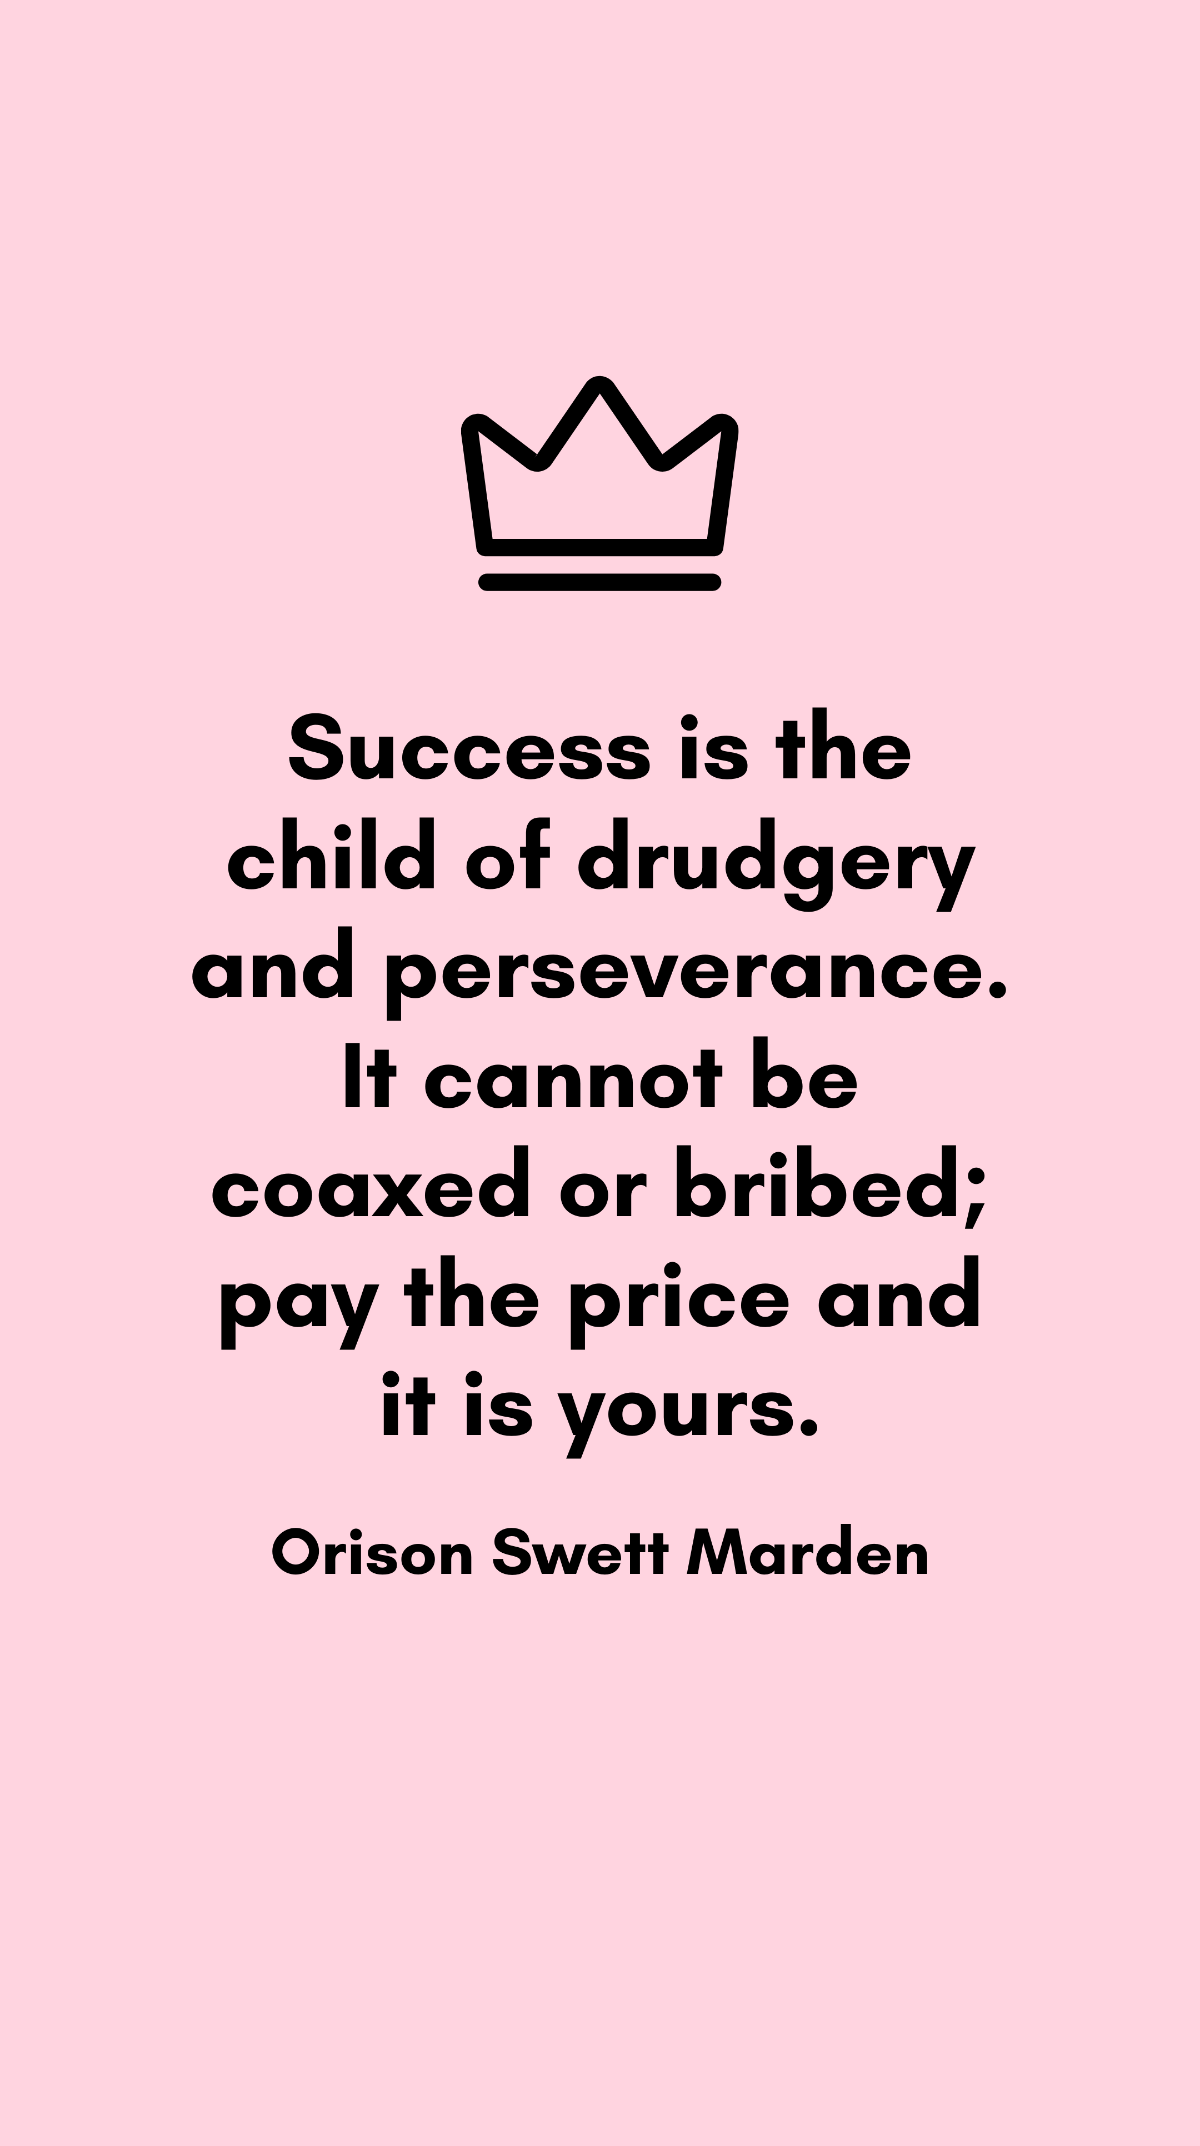 Free Orison Swett Marden - Success is the child of drudgery and perseverance. It cannot be coaxed or bribed; pay the price and it is yours. Template